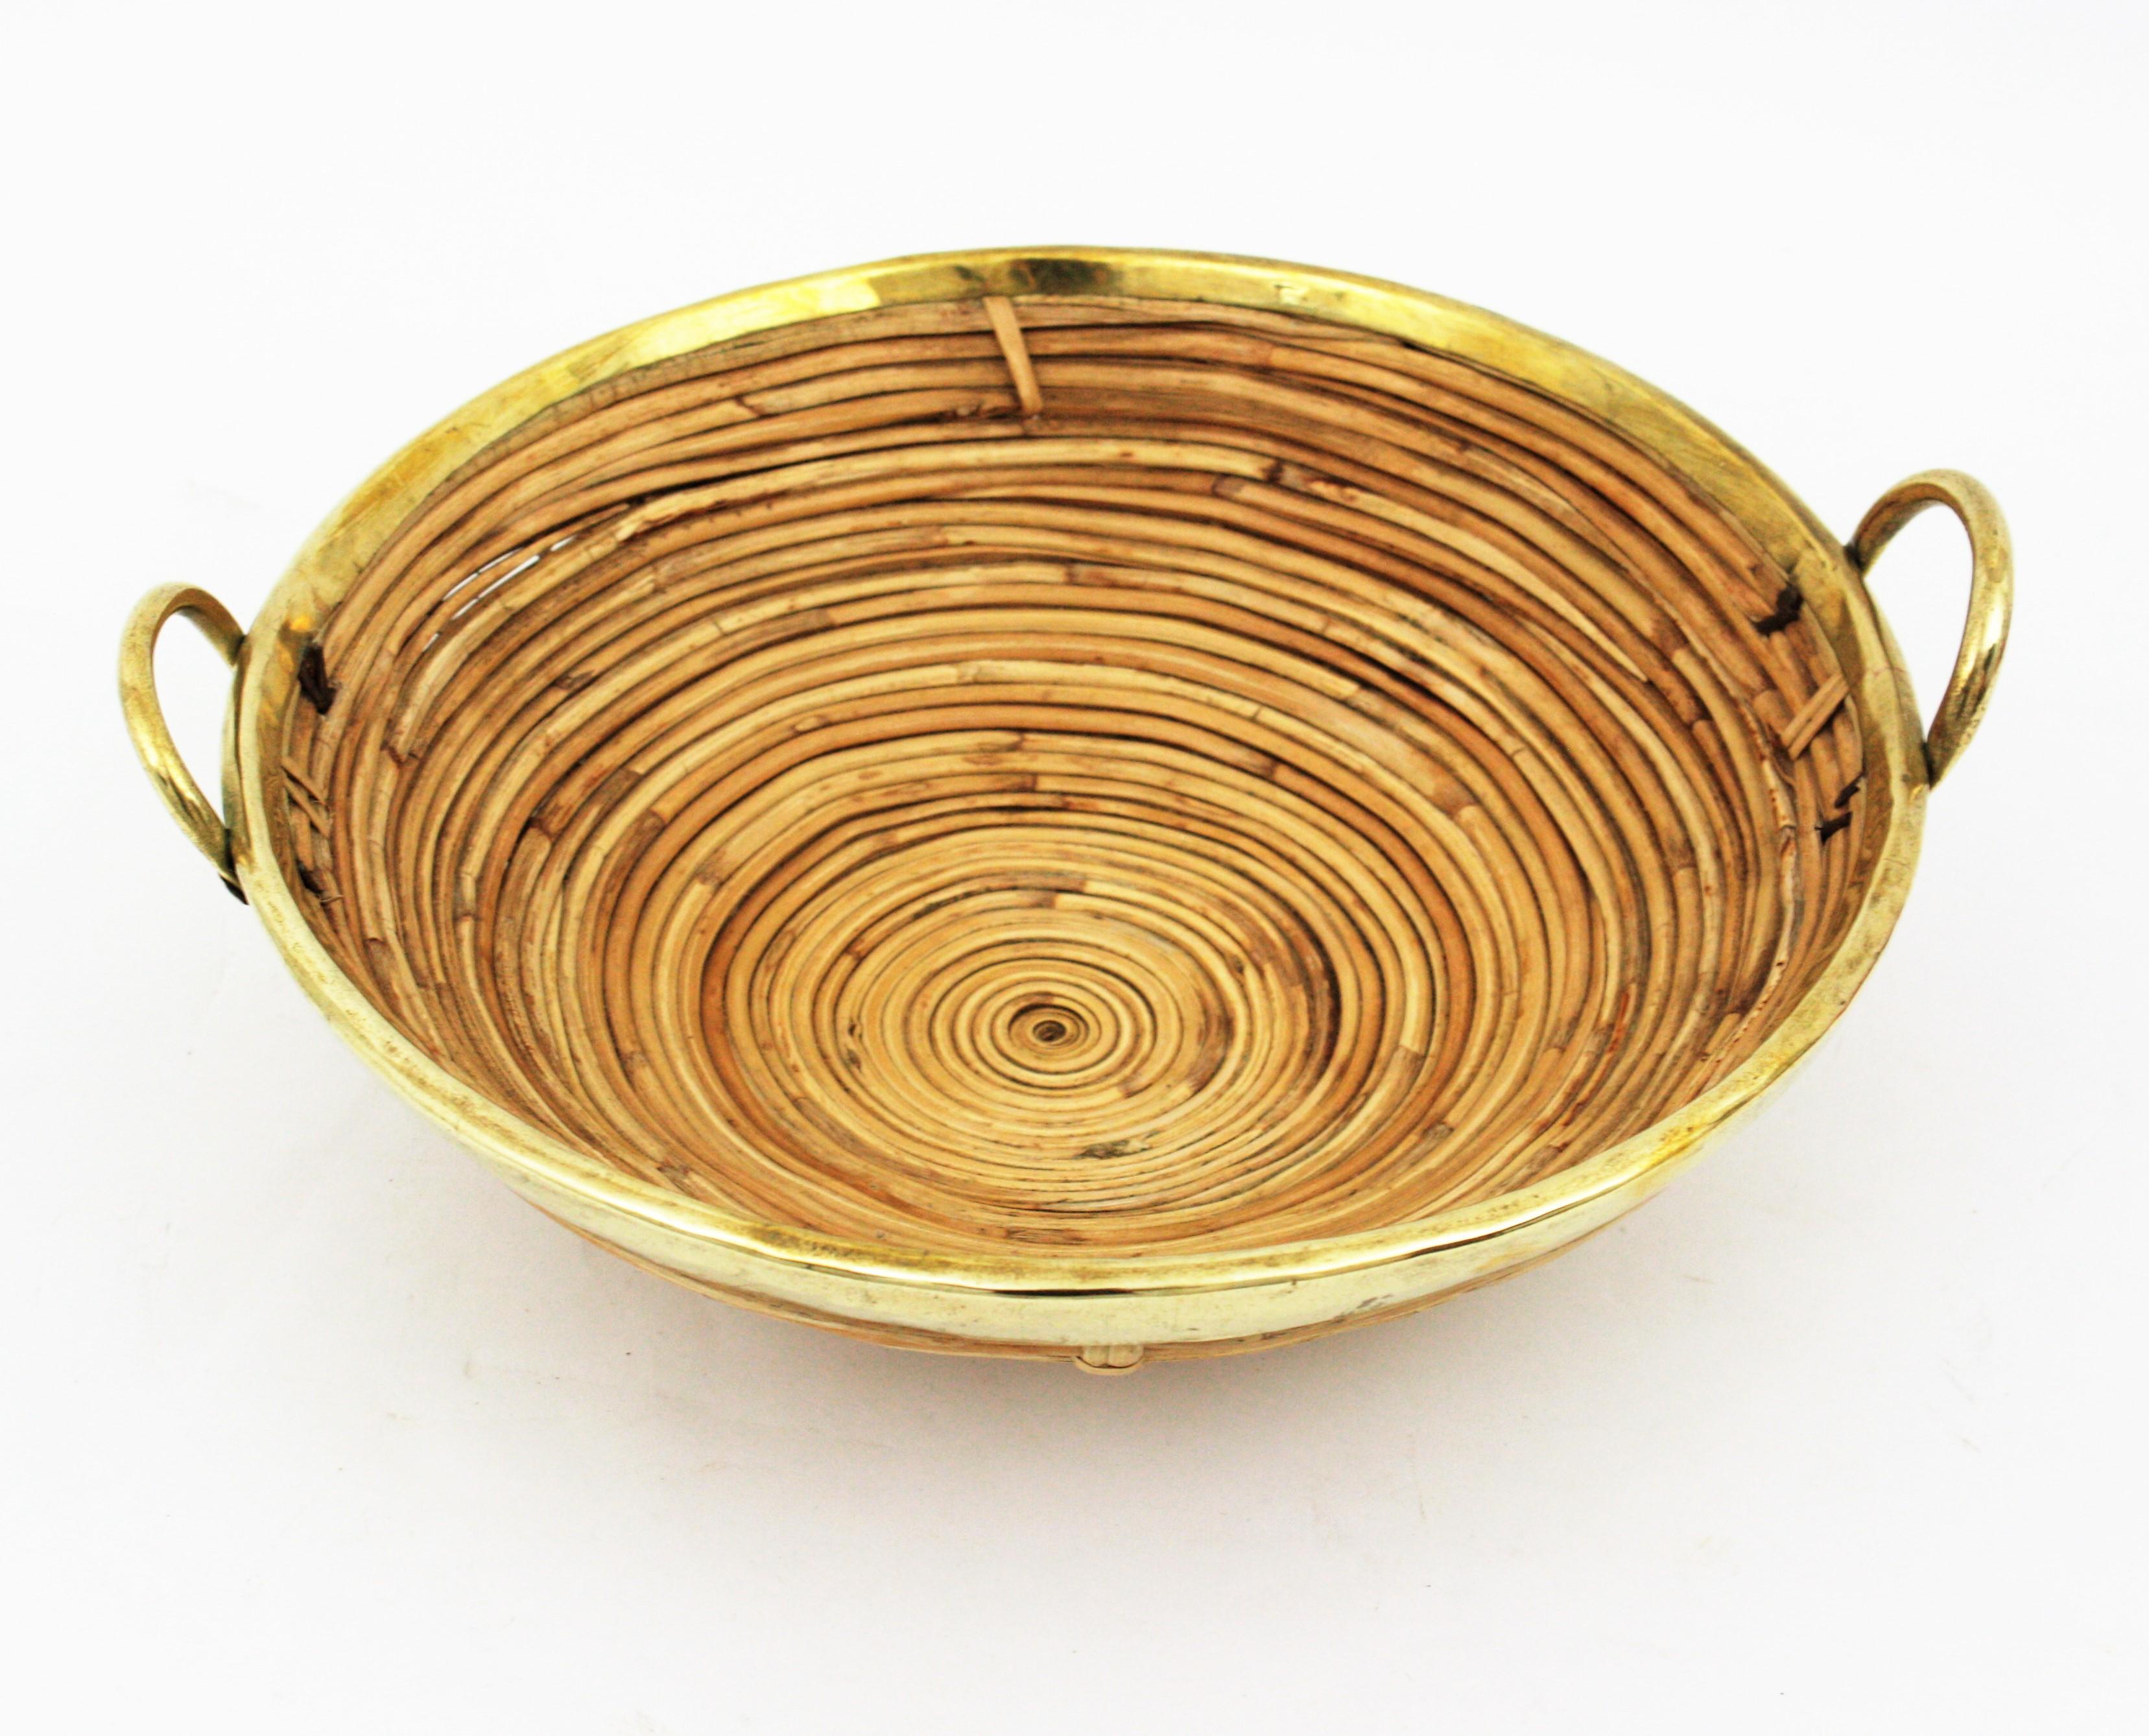 20th Century Rattan and Brass Italian Centerpiece Basket with Handles, 1970s For Sale